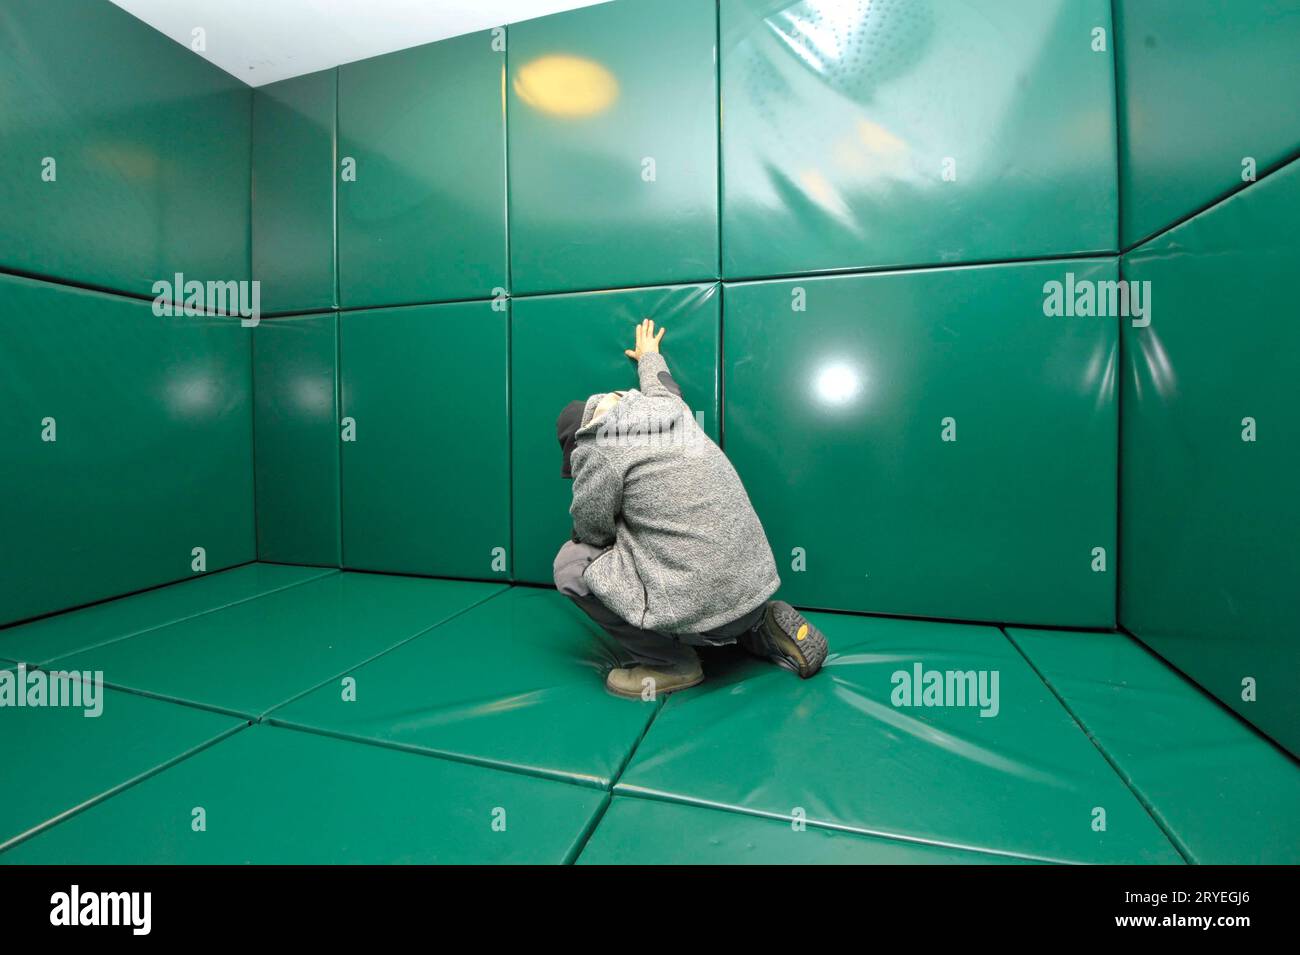 Man kneeling in green padded cell Stock Photo